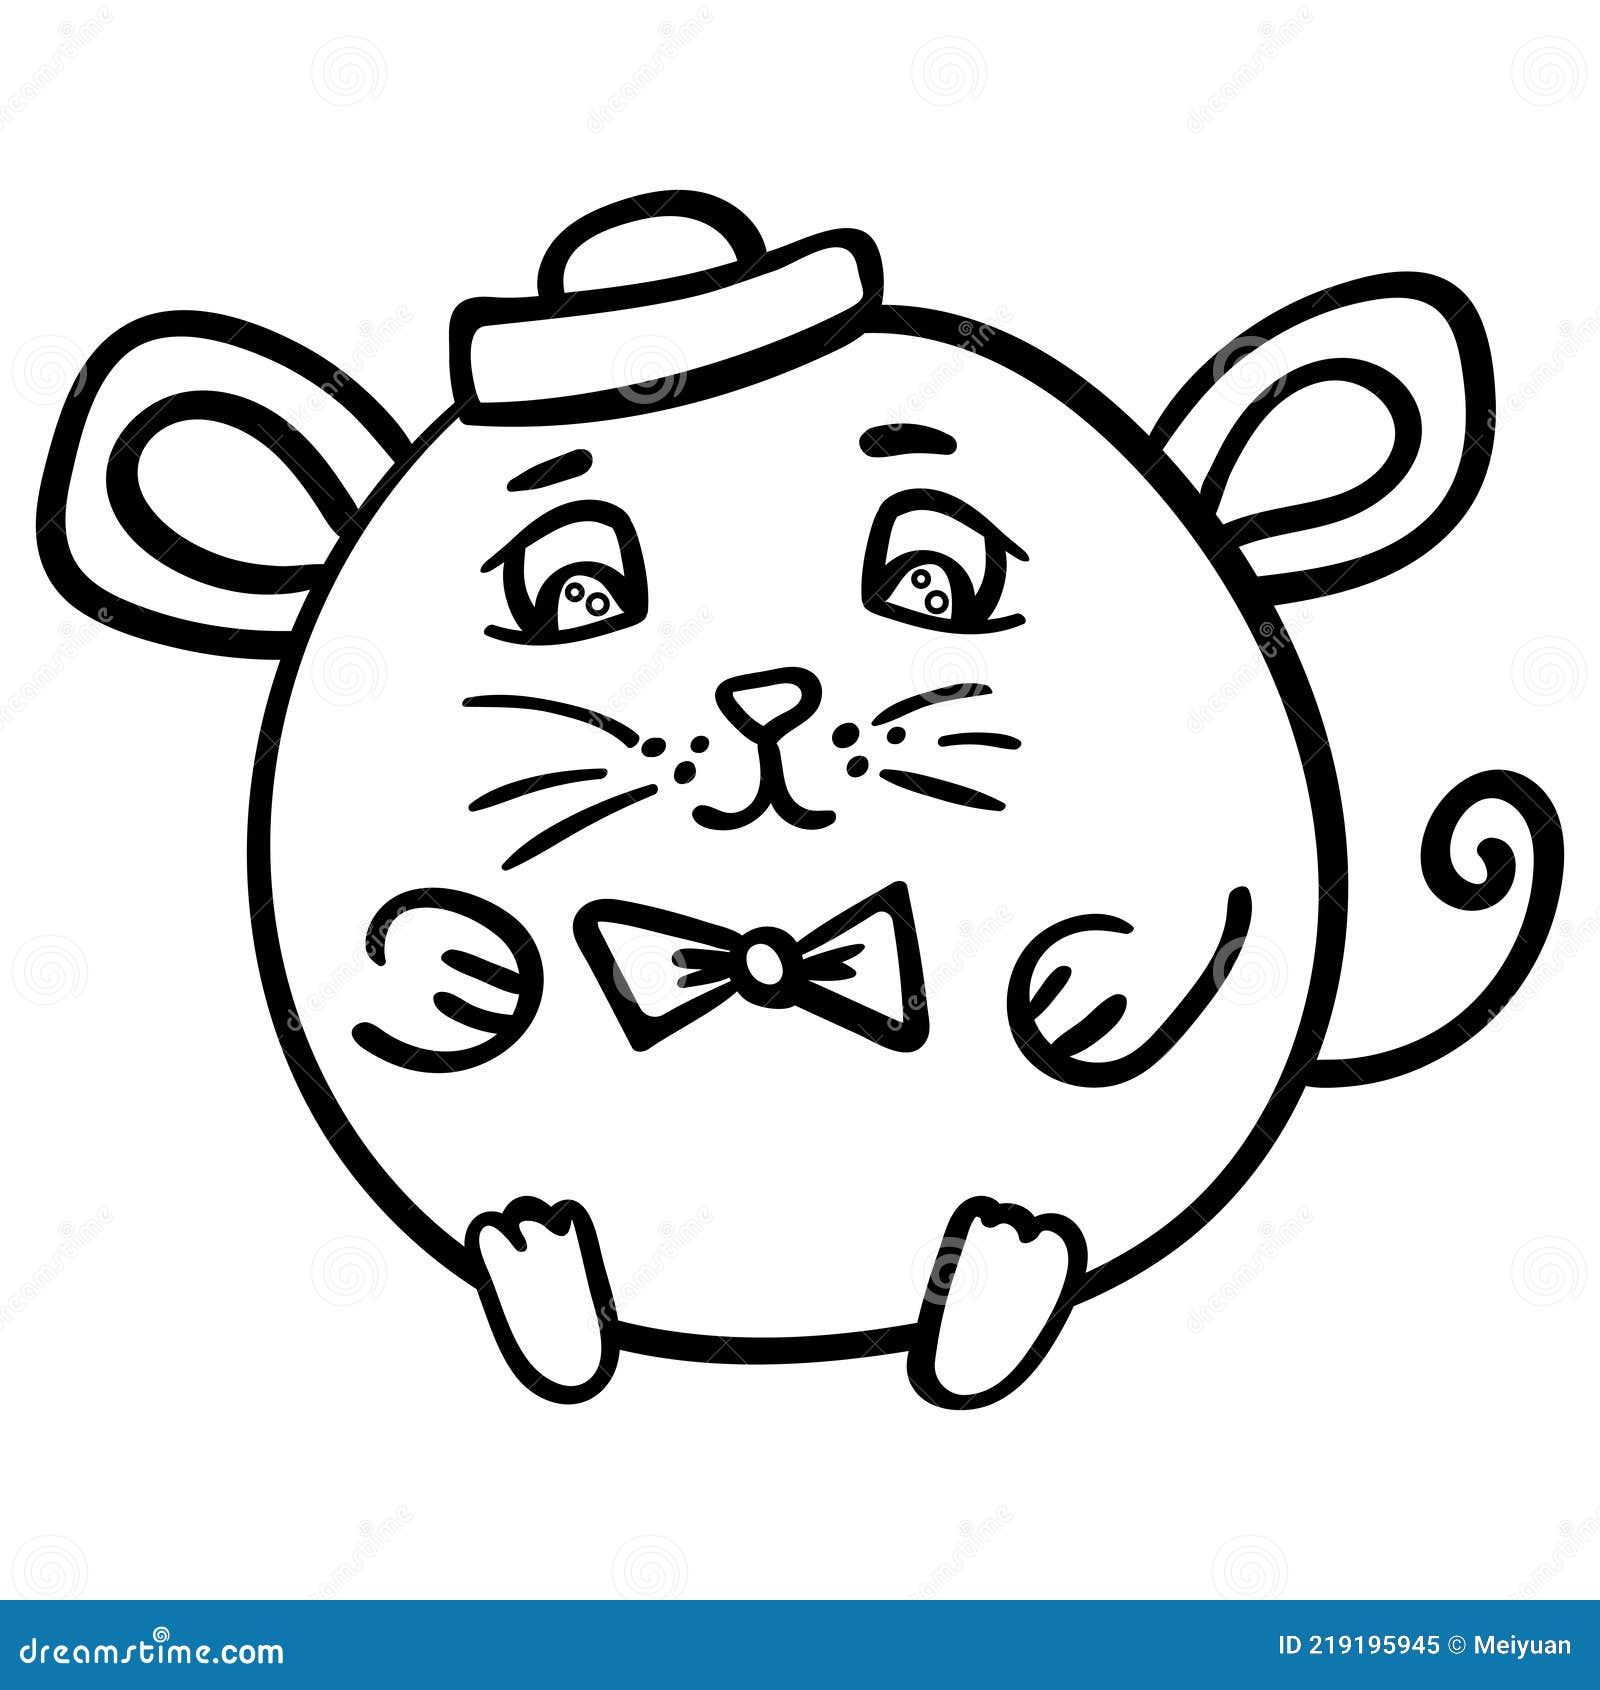 Cute mouse or rat in marine clothing coloring page coloring book contour stock vector